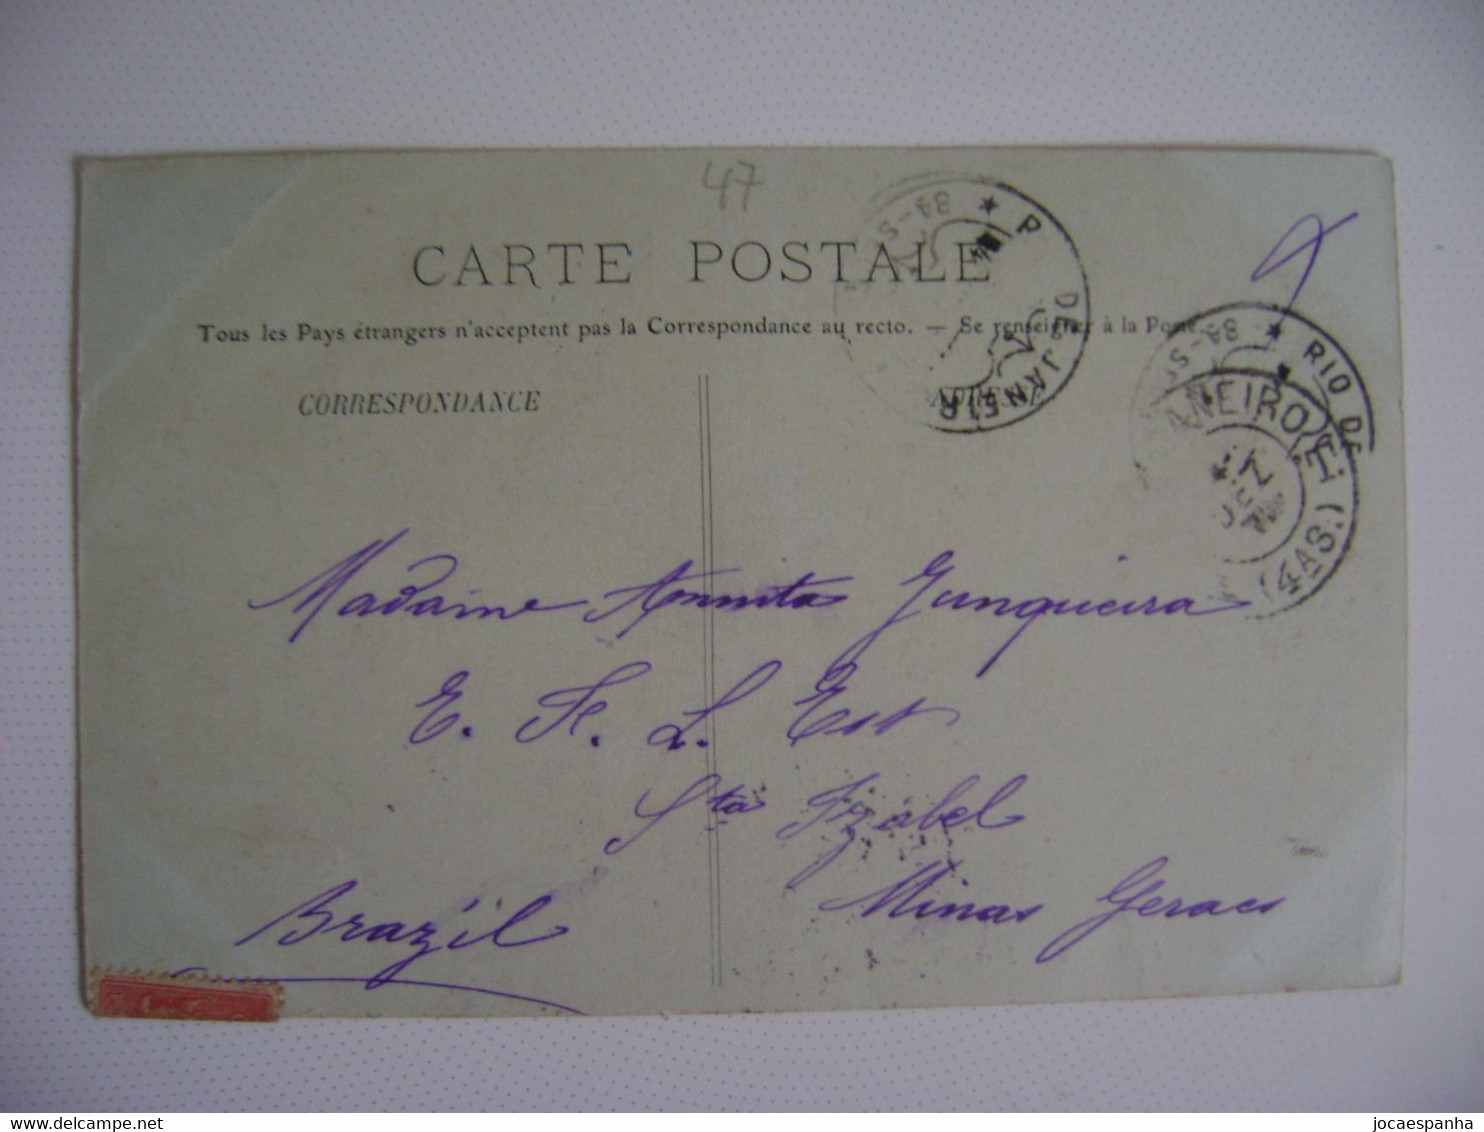 FRANCE - POST CARD PARIS - LA FEIRE A LA FERRAILLE SENT TO BRAZIL IN 1905 IN THE STATE - Fairs